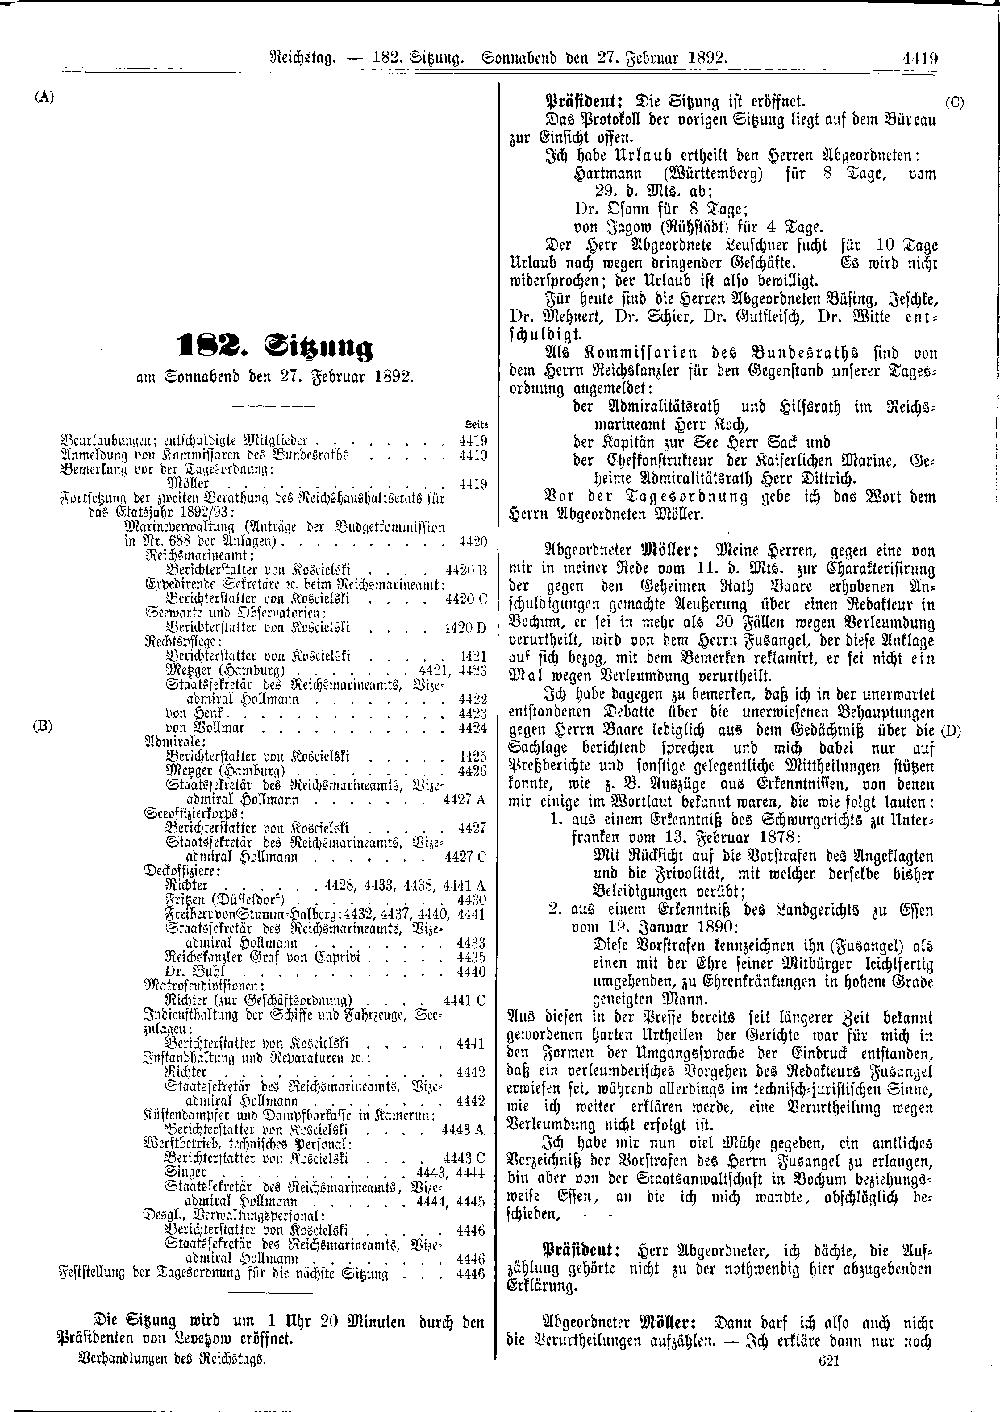 Scan of page 4419